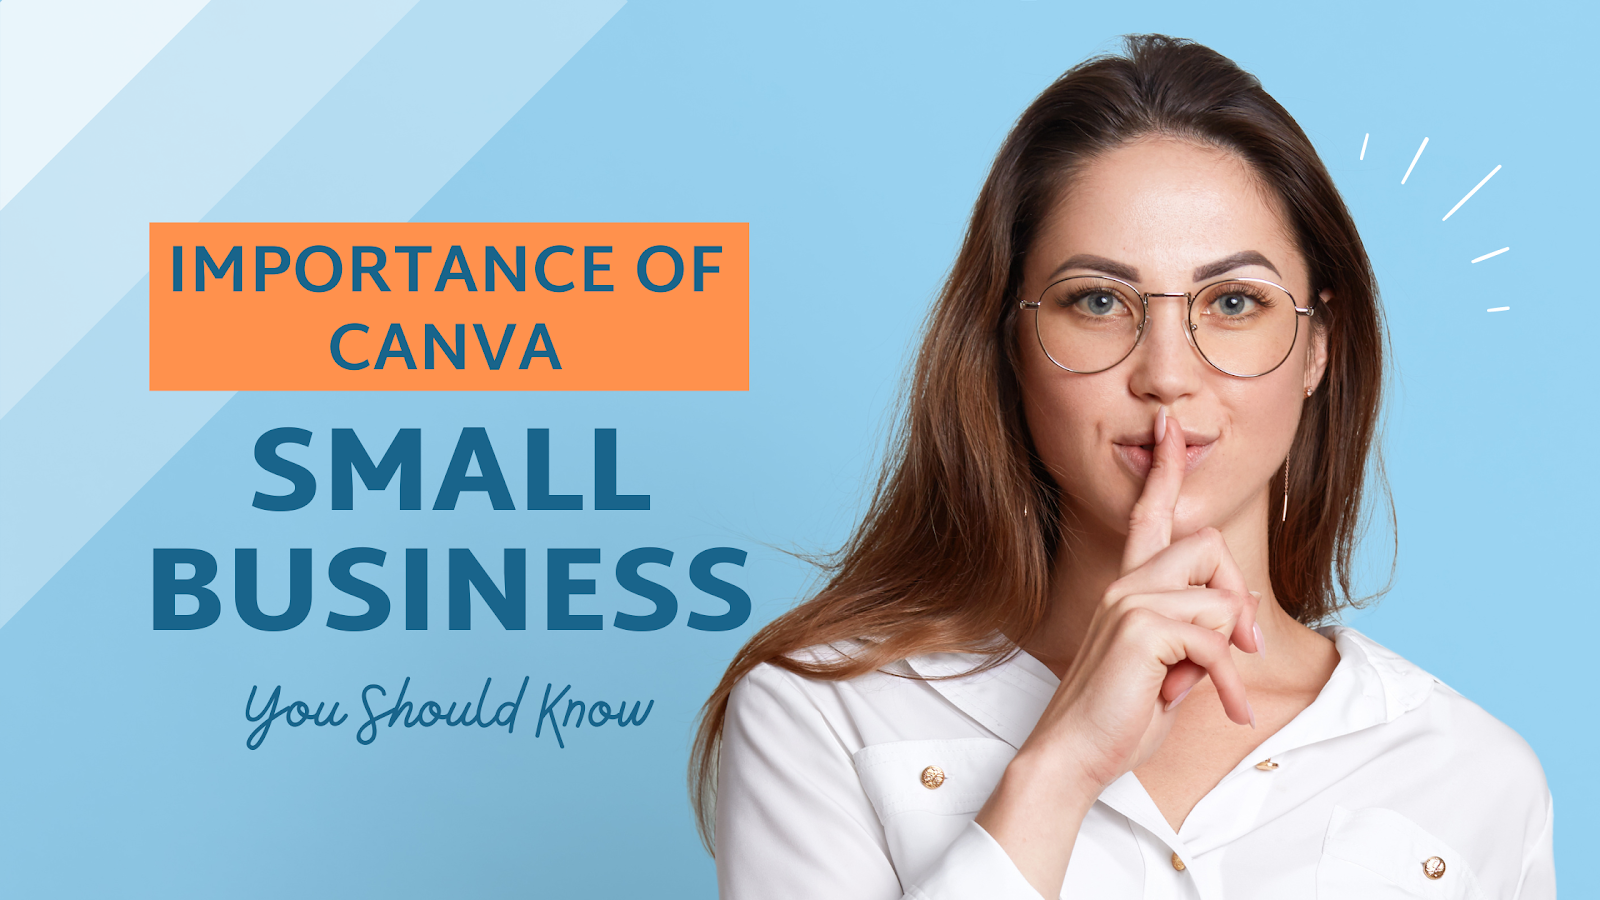 Importance of Canva in small business